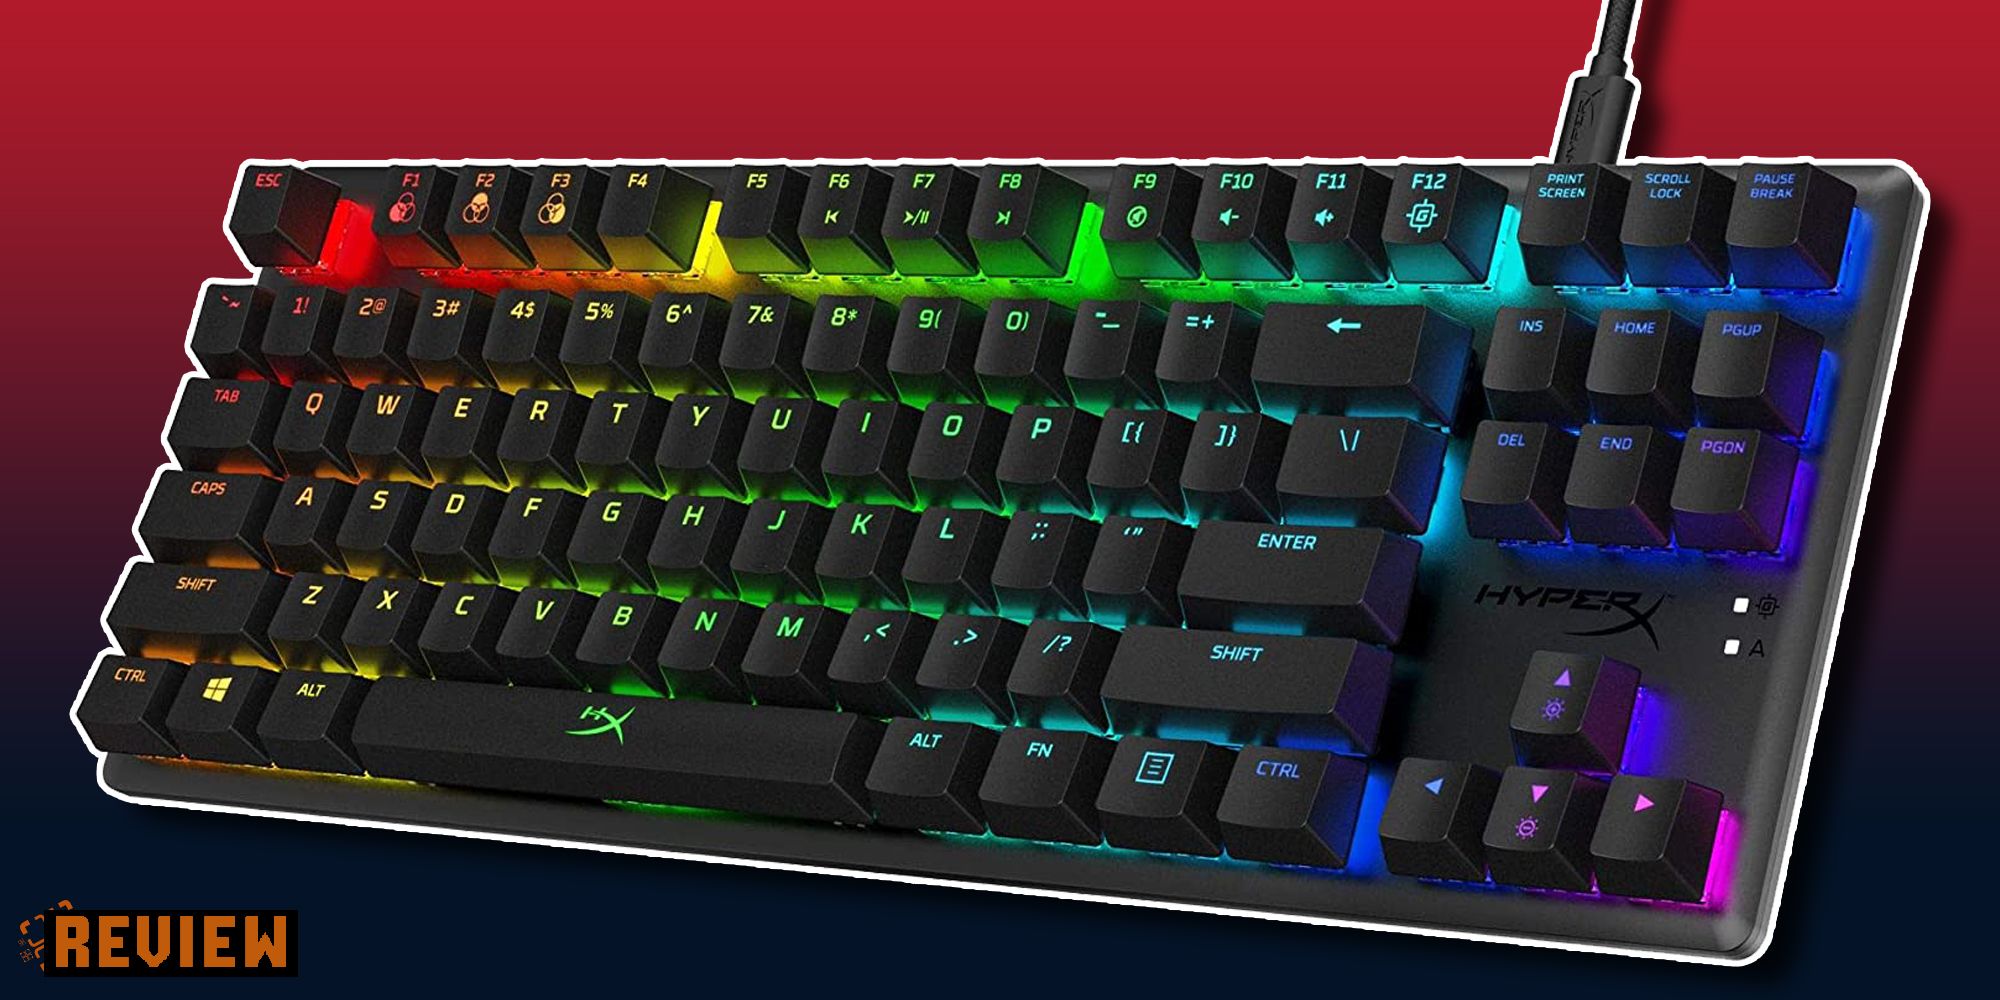 Product image of the HyperX Alloy Origins Core keyboard.